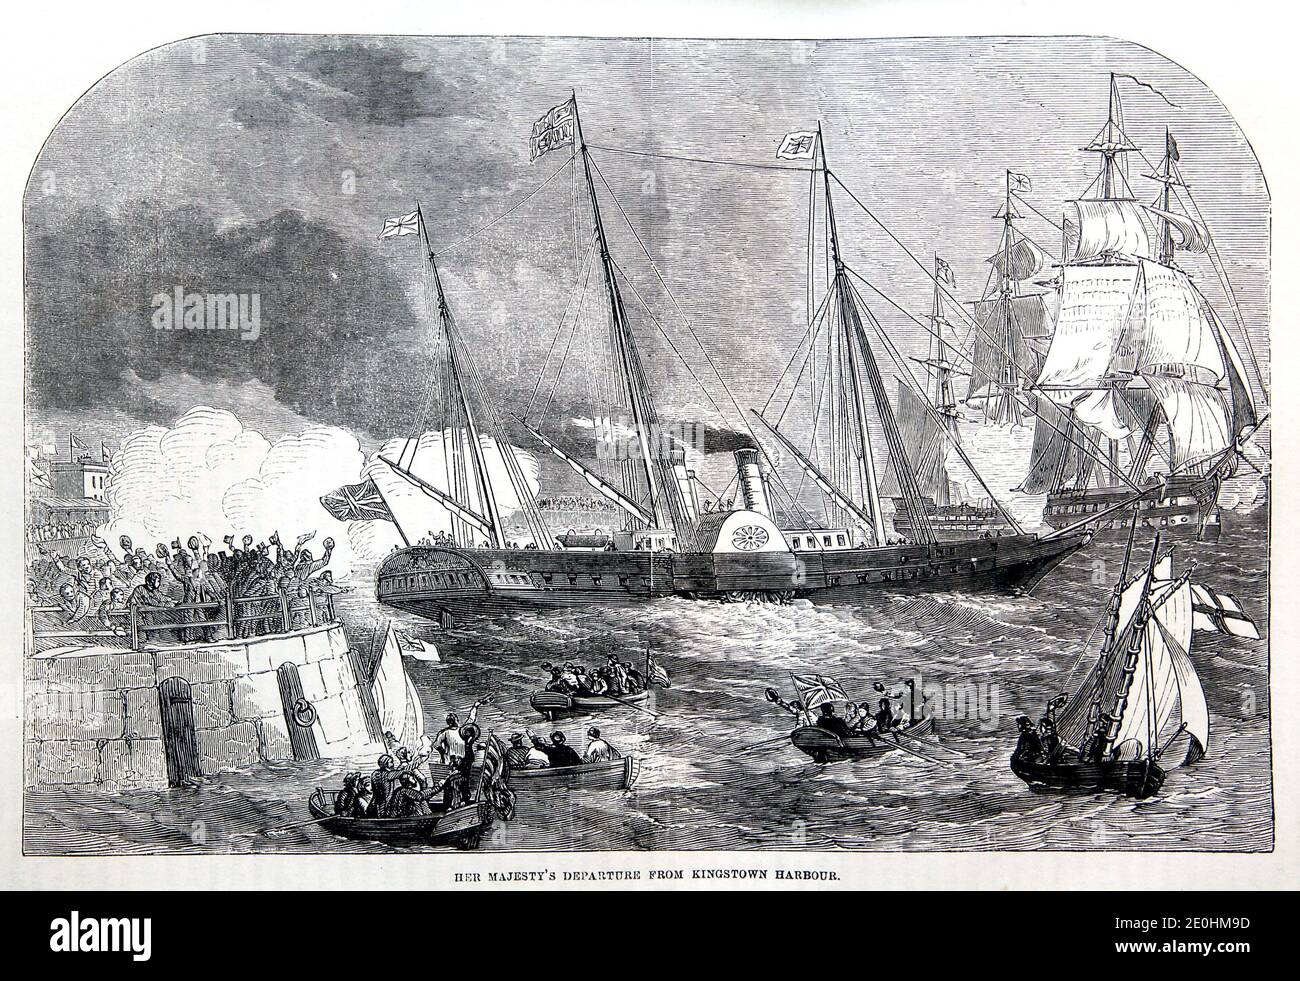 Illustration: Queen Victoria's departure from Kingstown Harbour (now Dun Laoghaire) following her visit to Ireland in 1849. Stock Photo